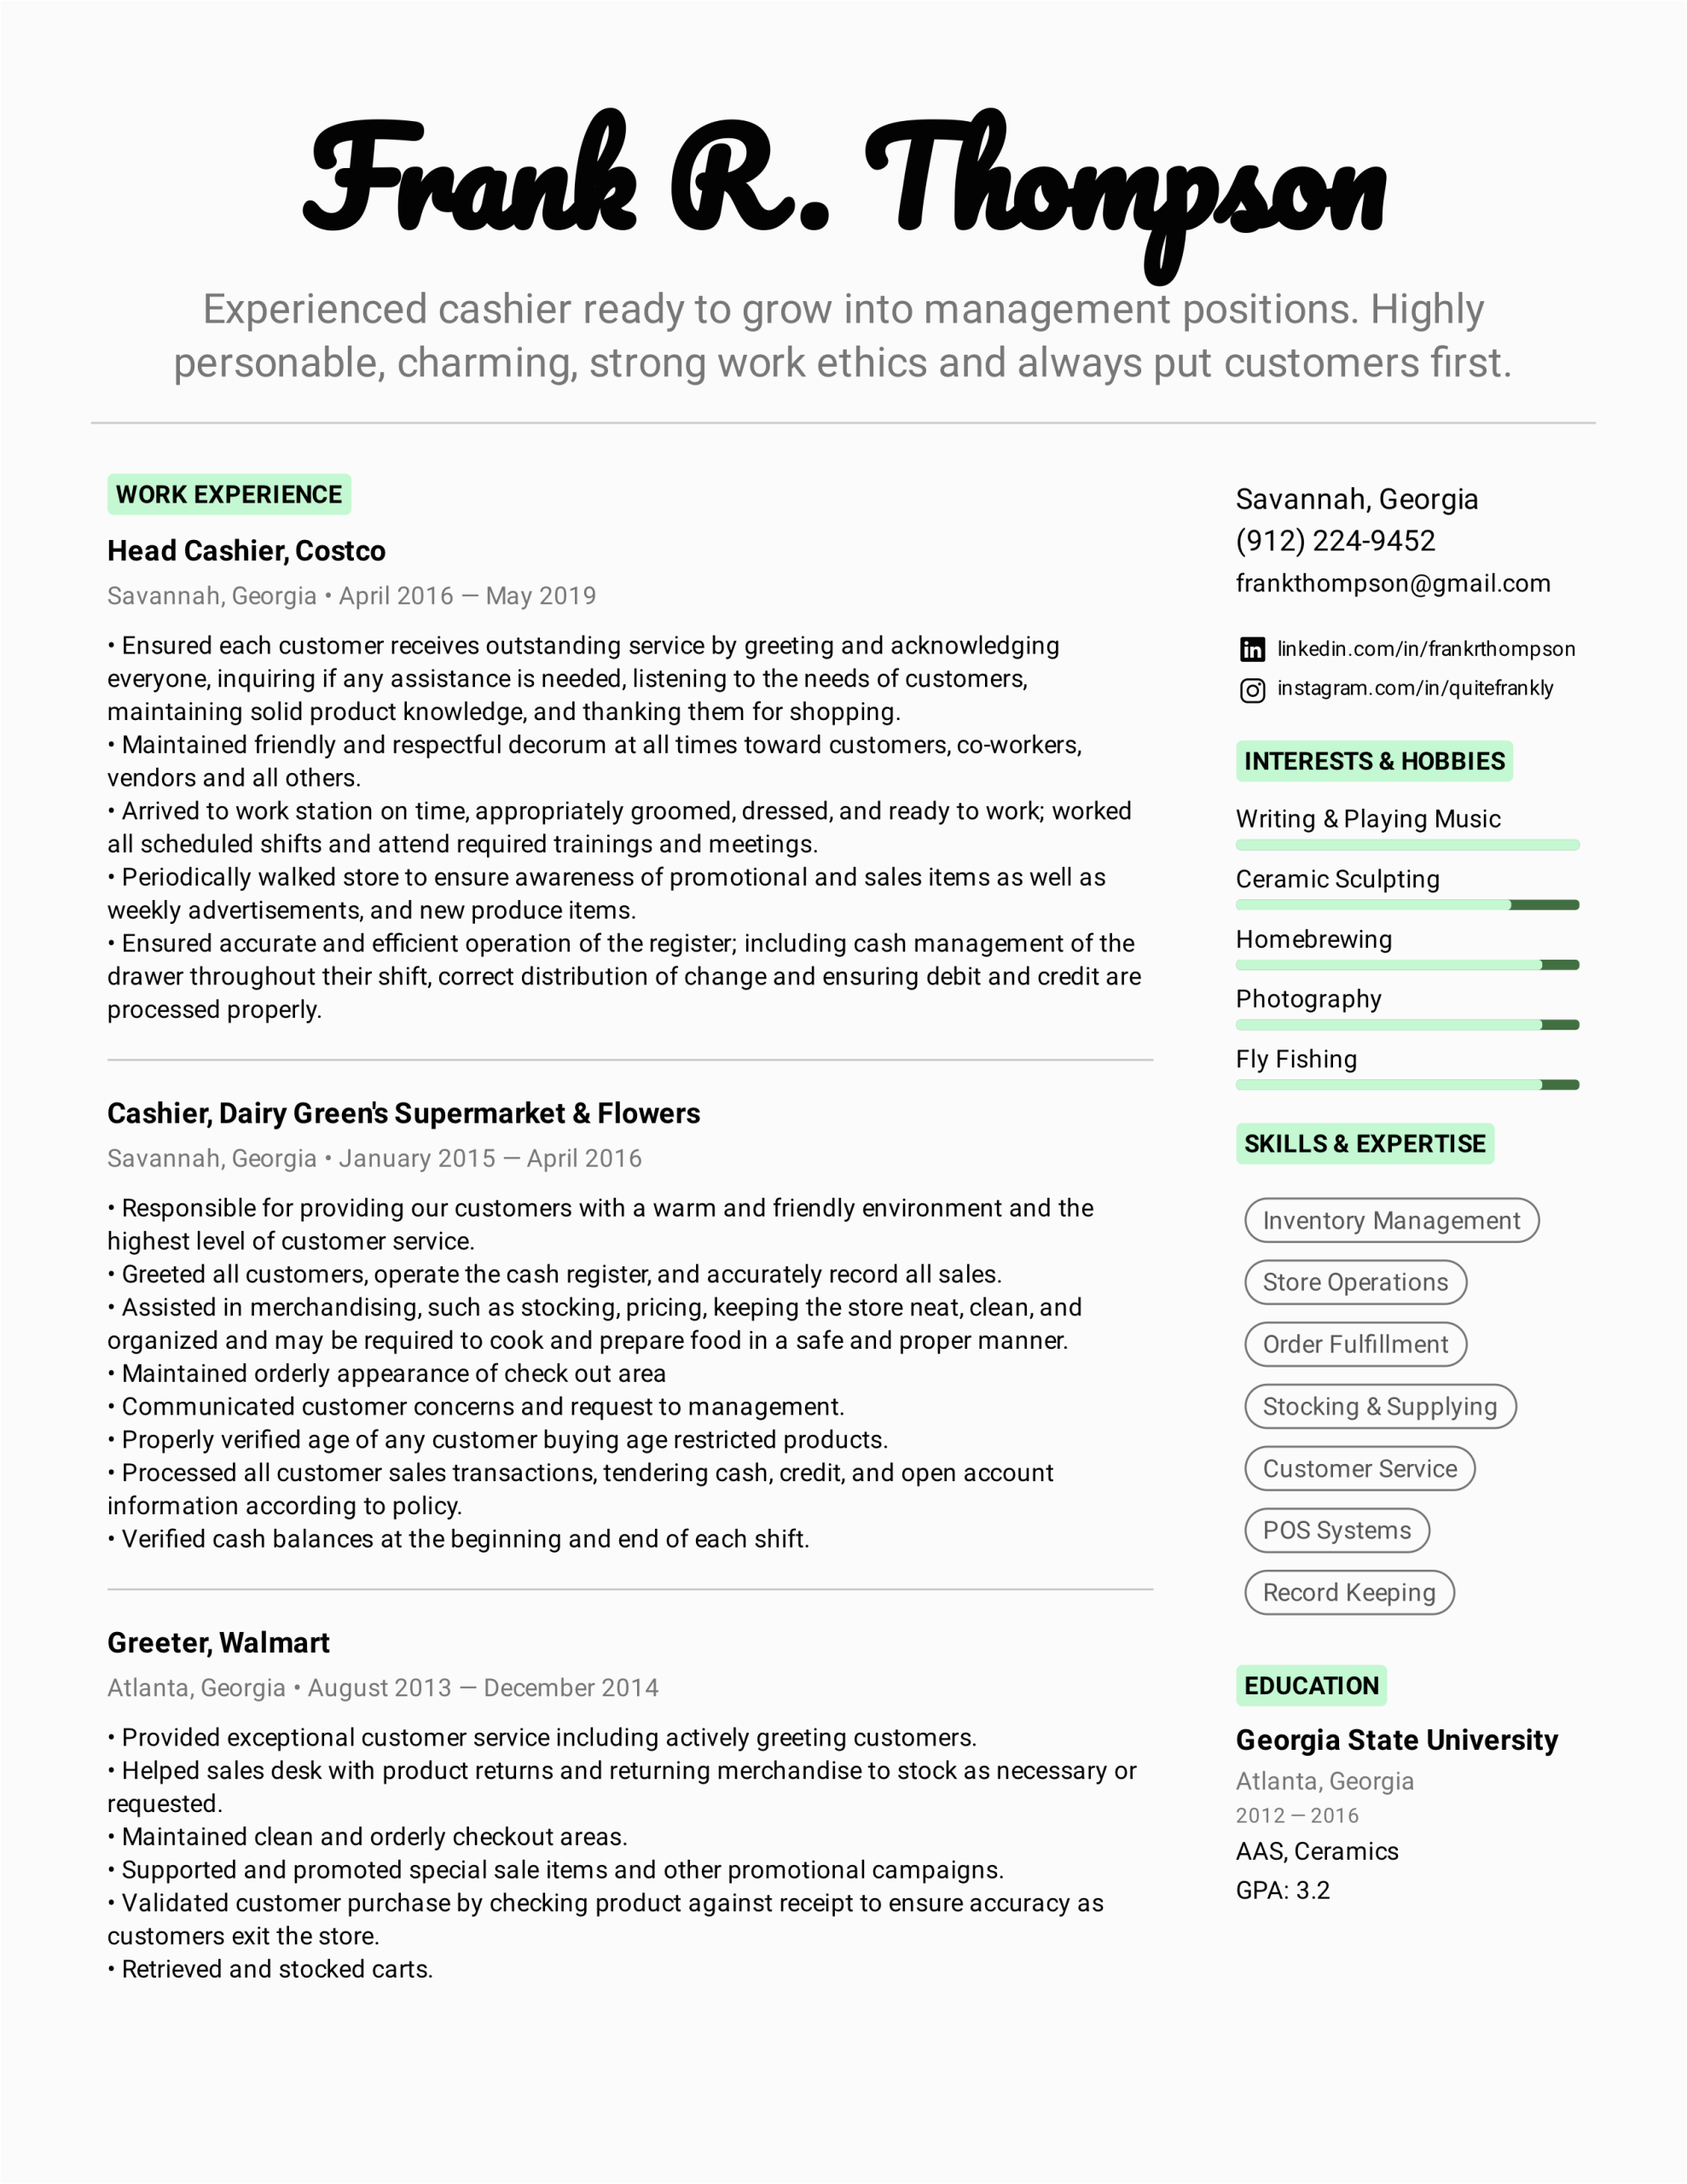 Job Interview Site Resume Skills List Sample Examples Cashier Resume Example